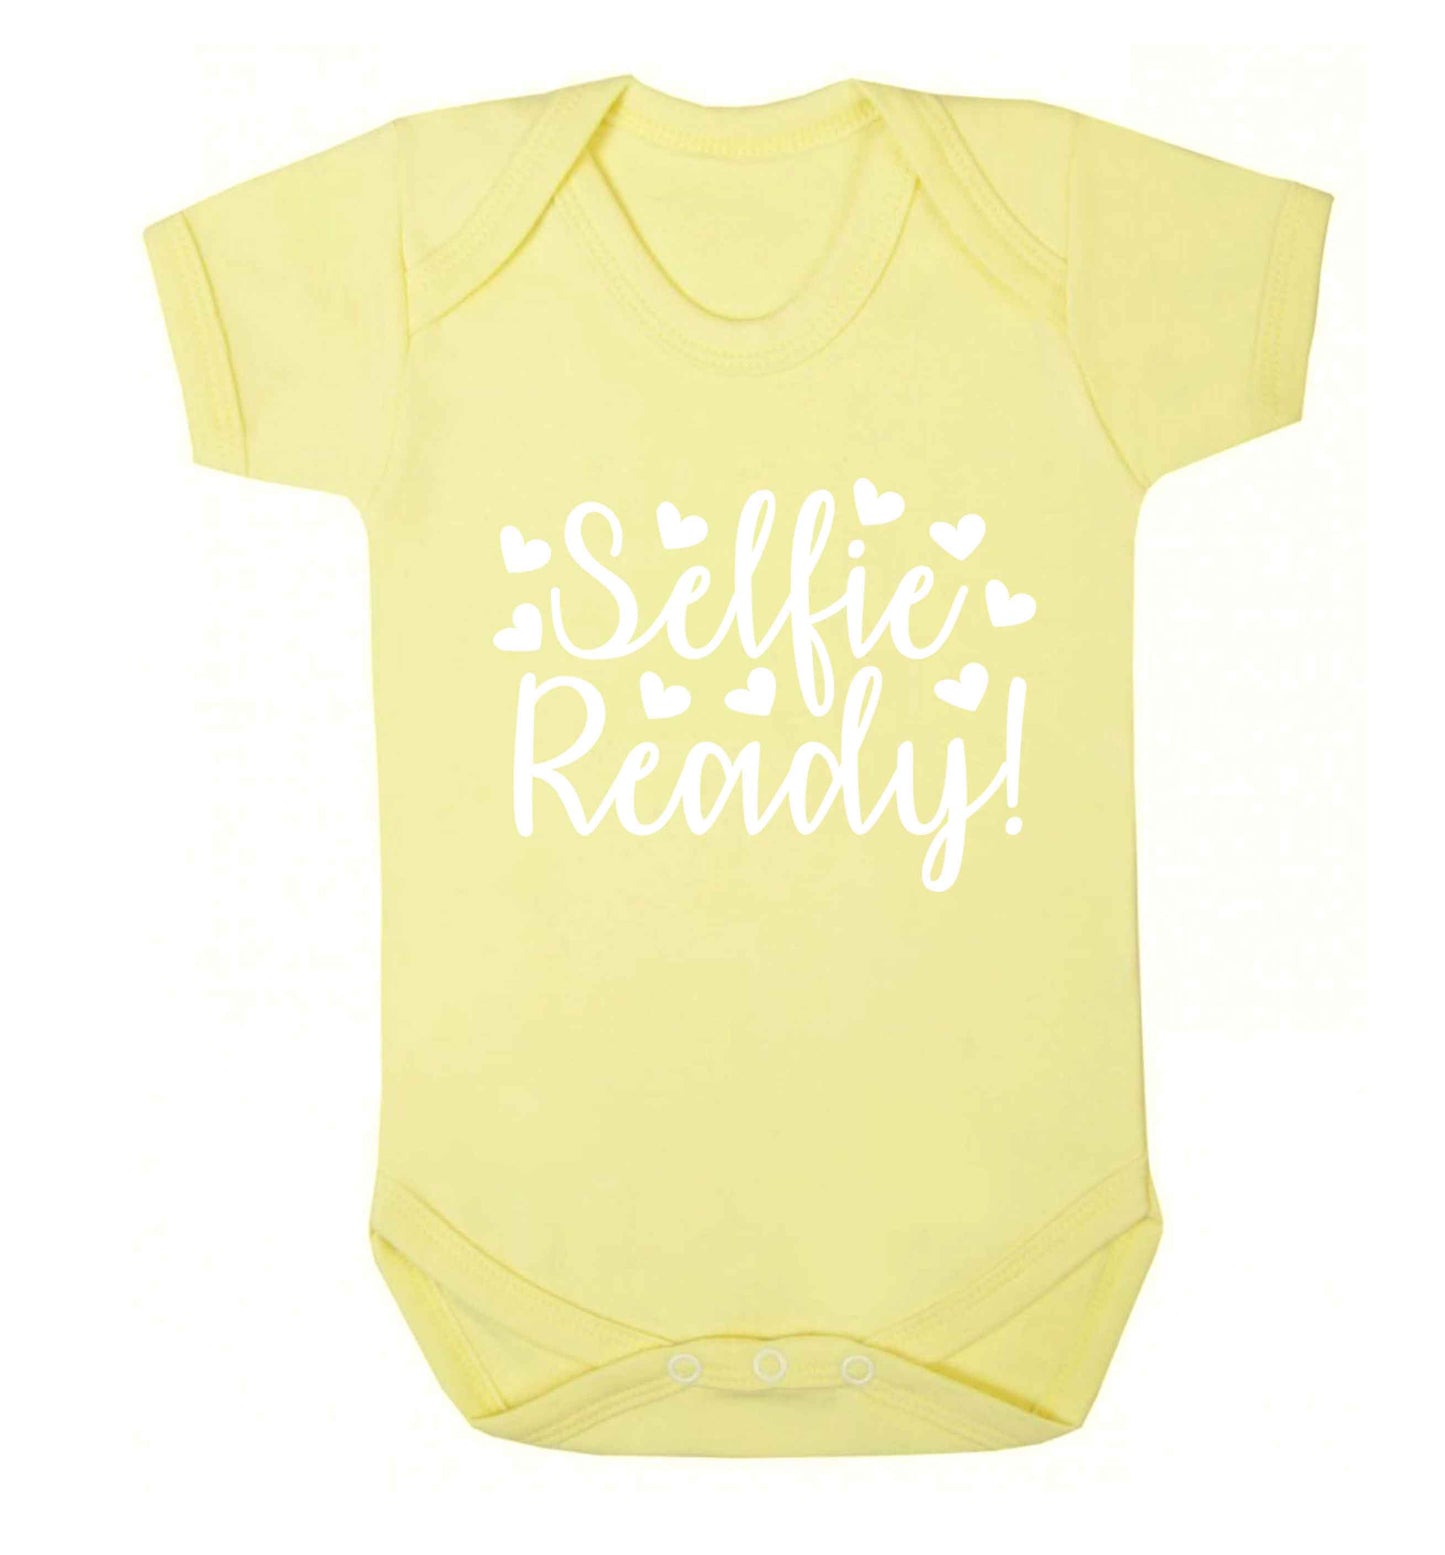 Selfie ready Baby Vest pale yellow 18-24 months